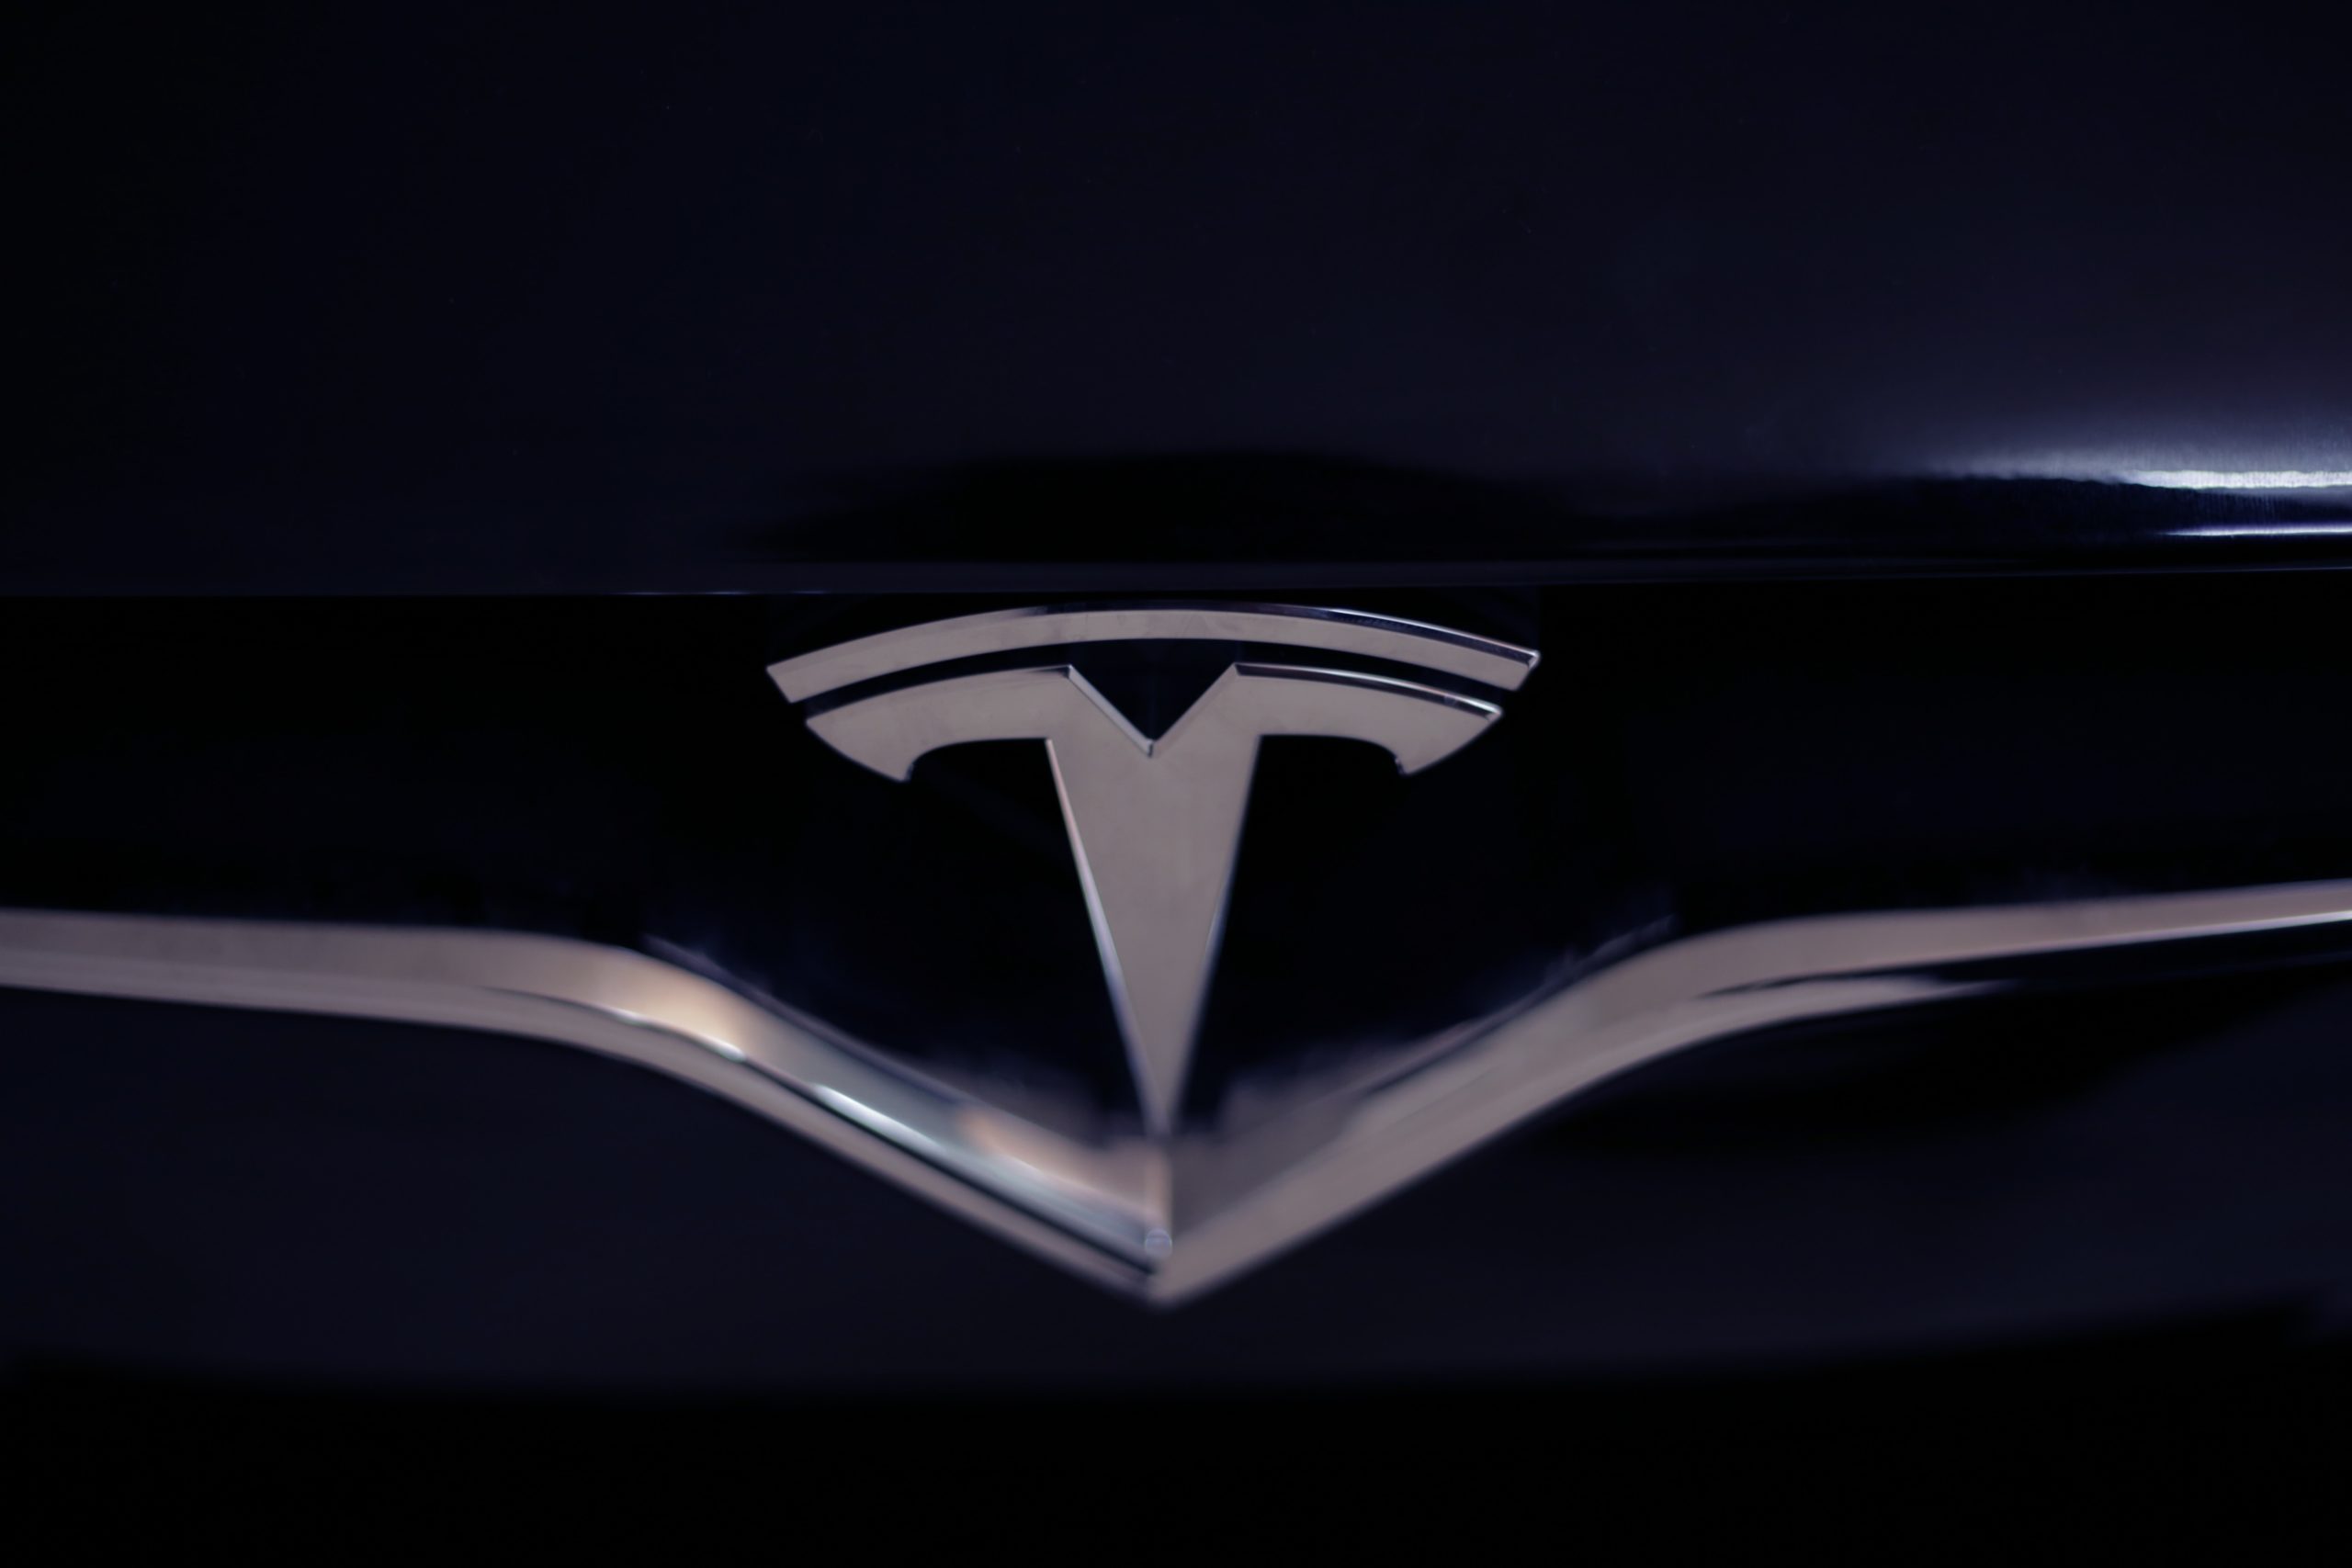 Tesla in hot water with federal agency after drivers report unintended acceleration issues